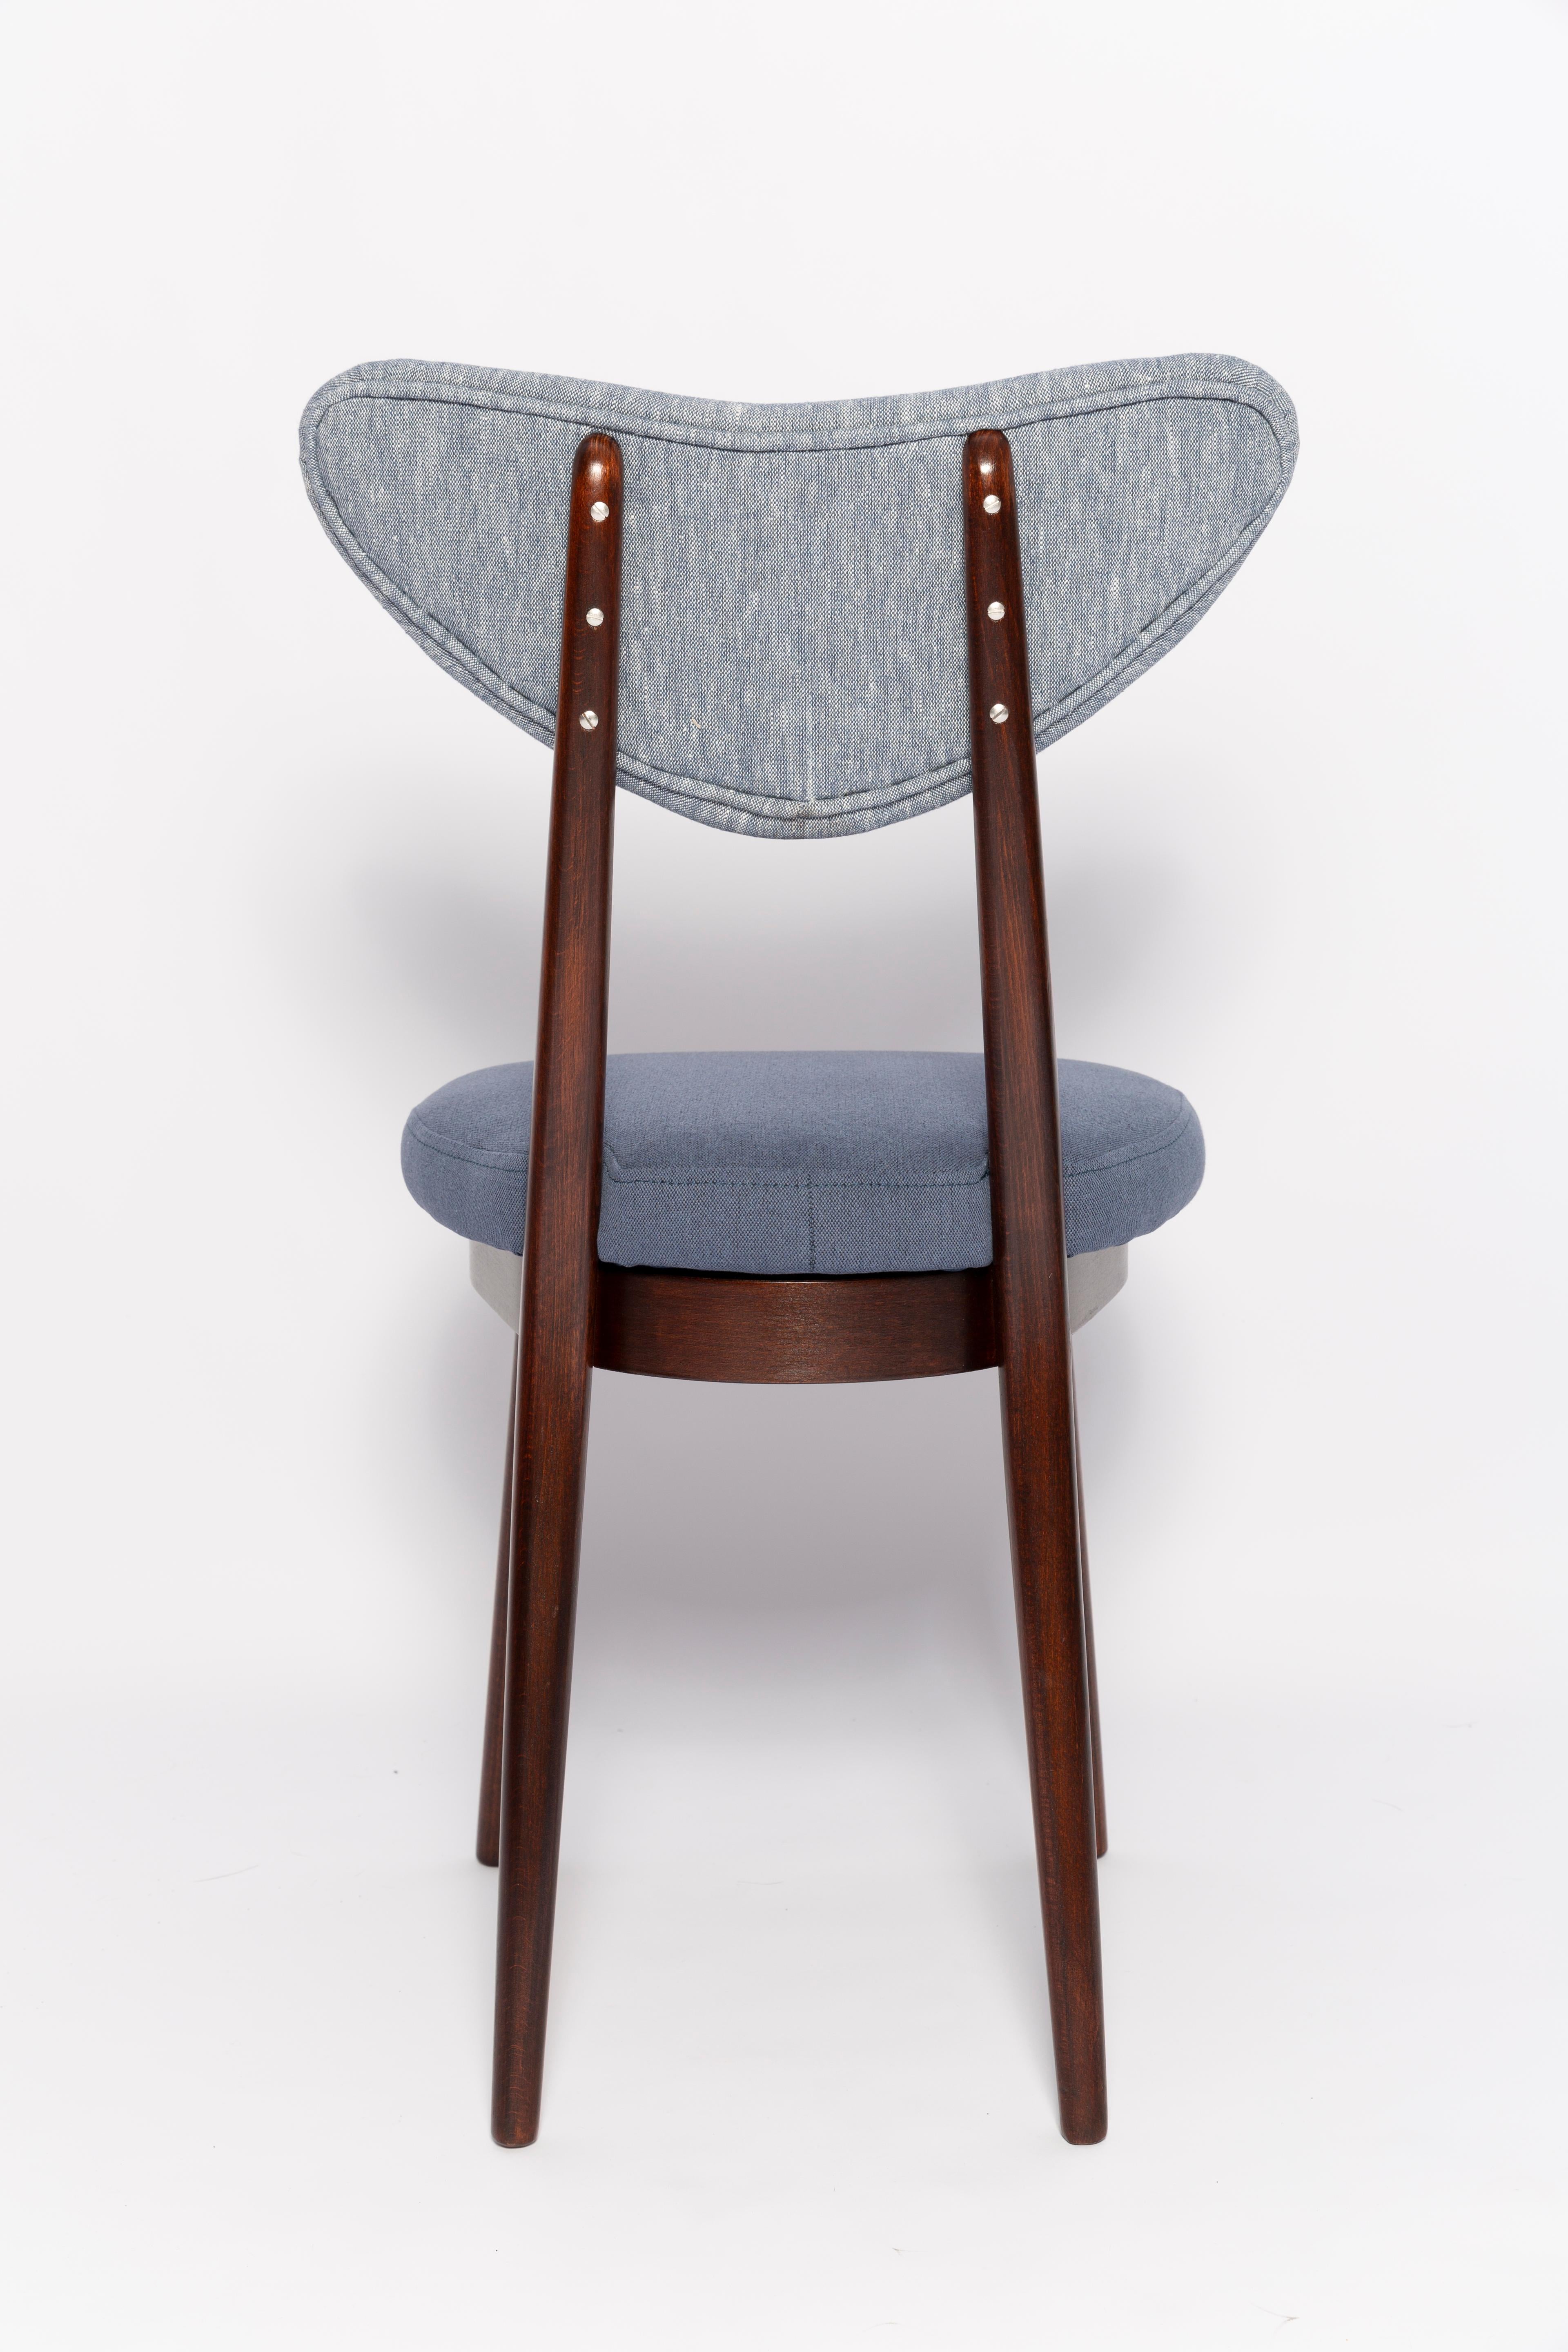 Set of Four Midcentury Light and Medium Blue Denim Heart Chairs, Europe, 1960s For Sale 3